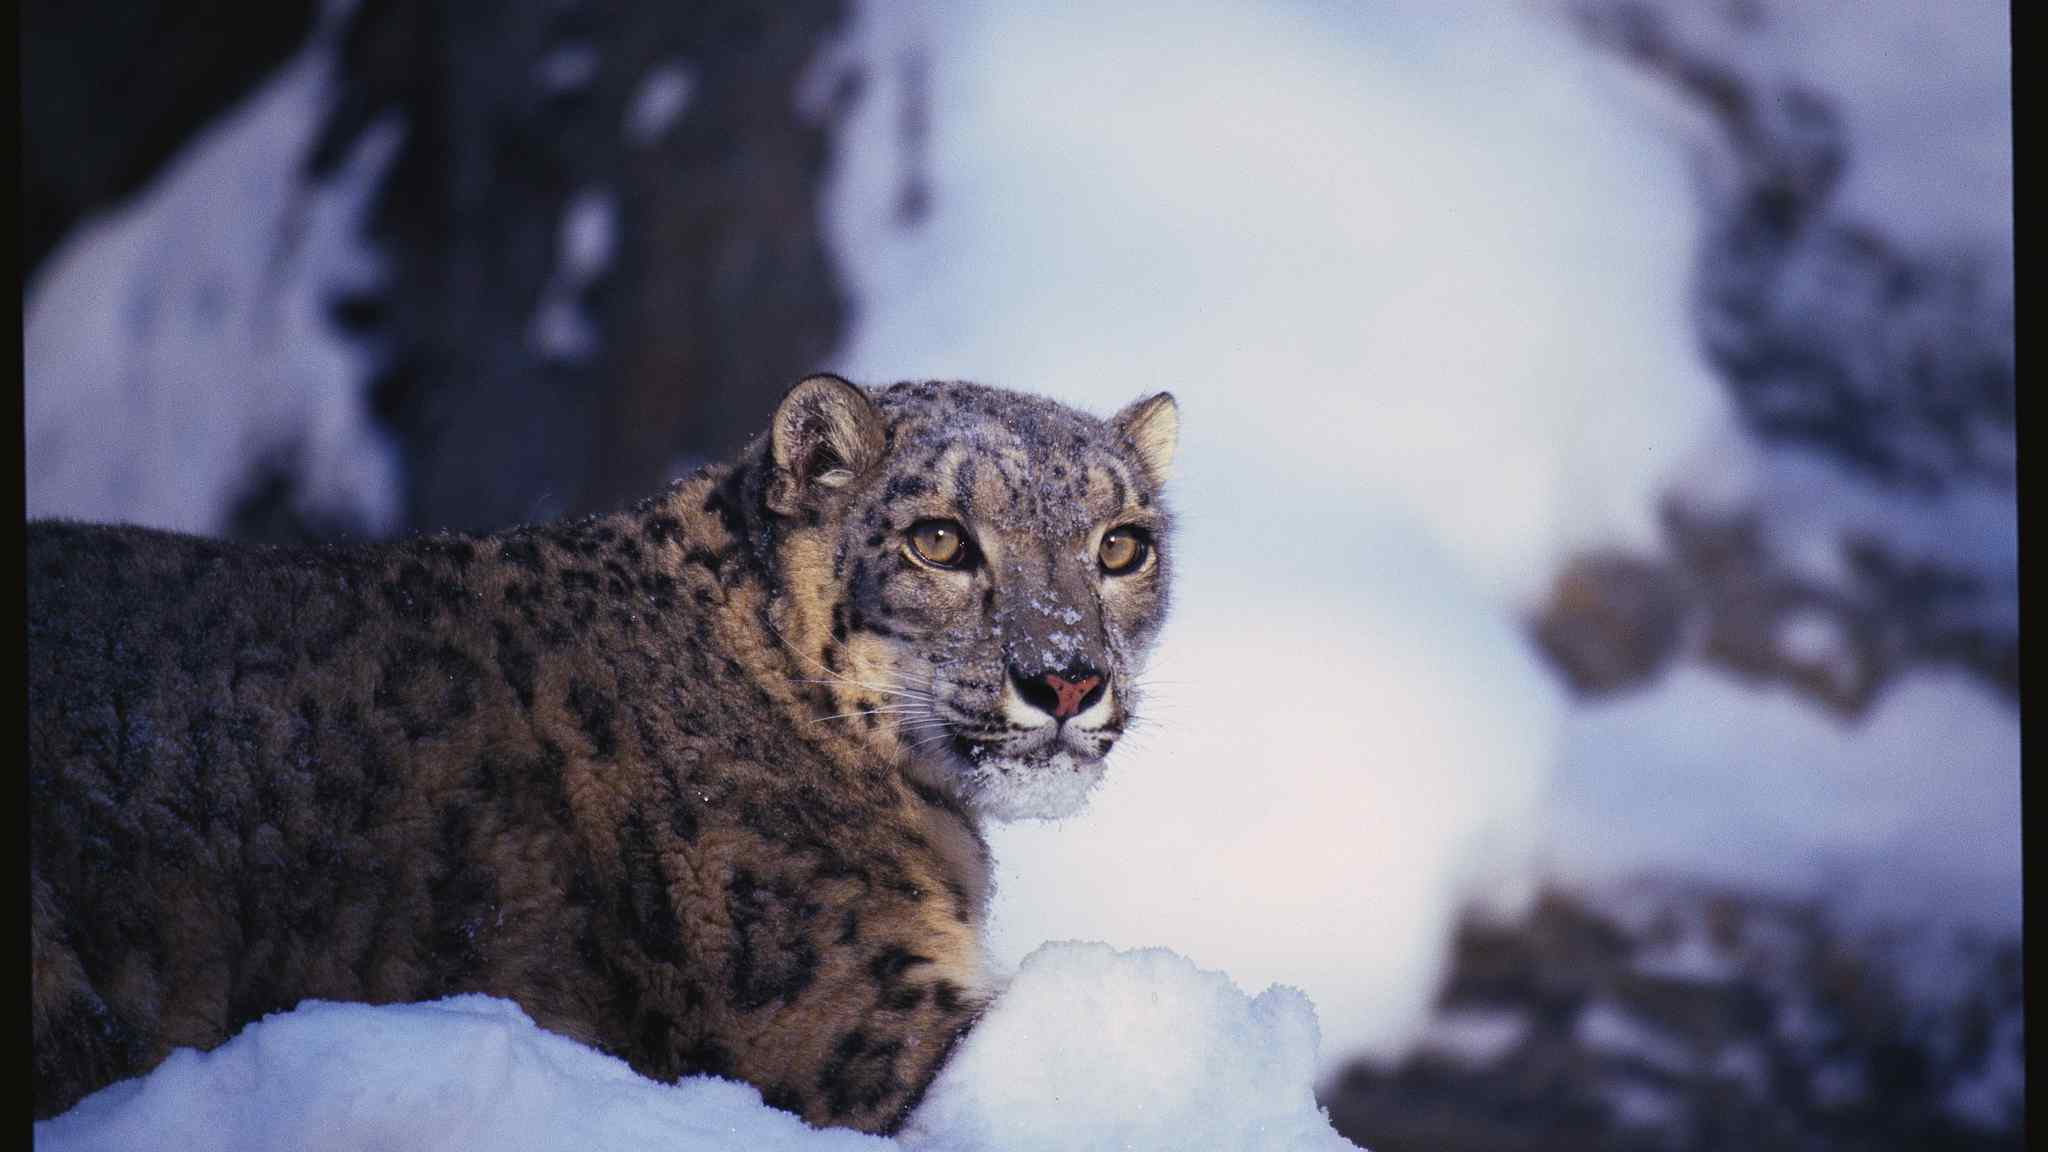 Report shows 60% of snow leopard habitats are in China - CGTN